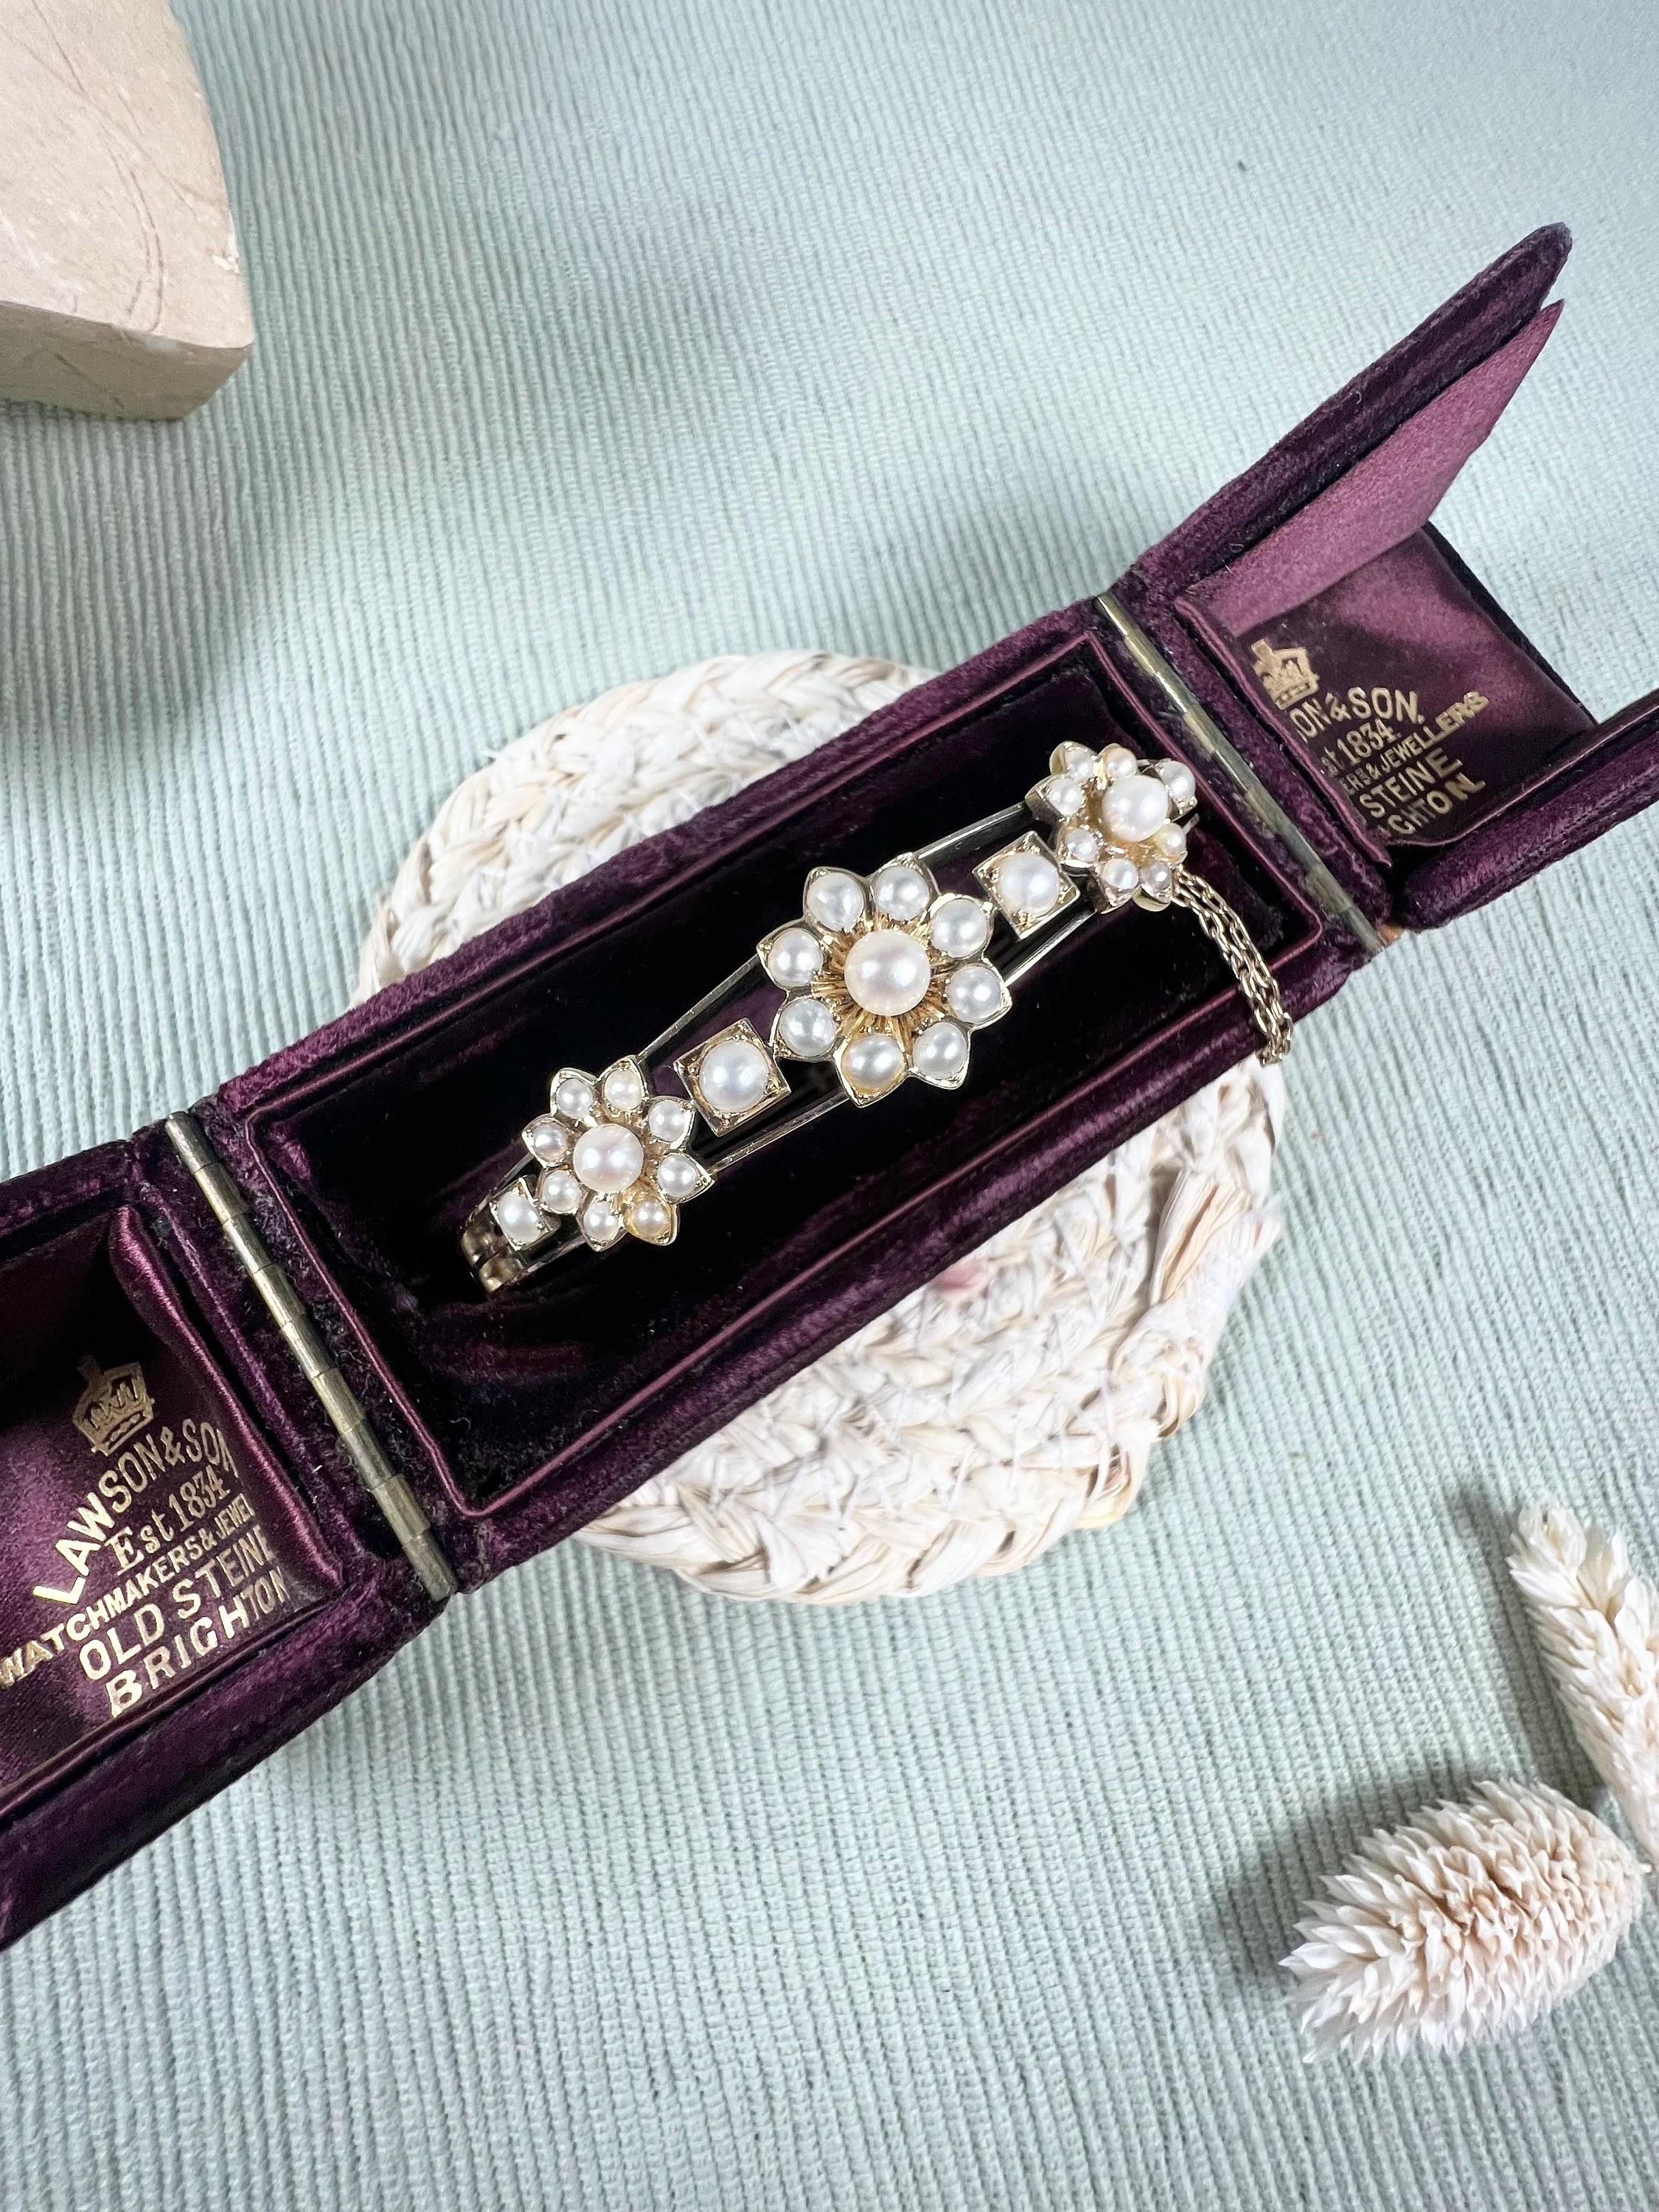 Antique Pearl Bangle 

15ct Gold Tested 

Circa 1900

Fabulous, Edwardian yellow gold bangle set with gorgeous, natural, seed pearl stones. The centre piece features three beautiful, pearl set flowers- mounted on a lovely open work gold bangle. The